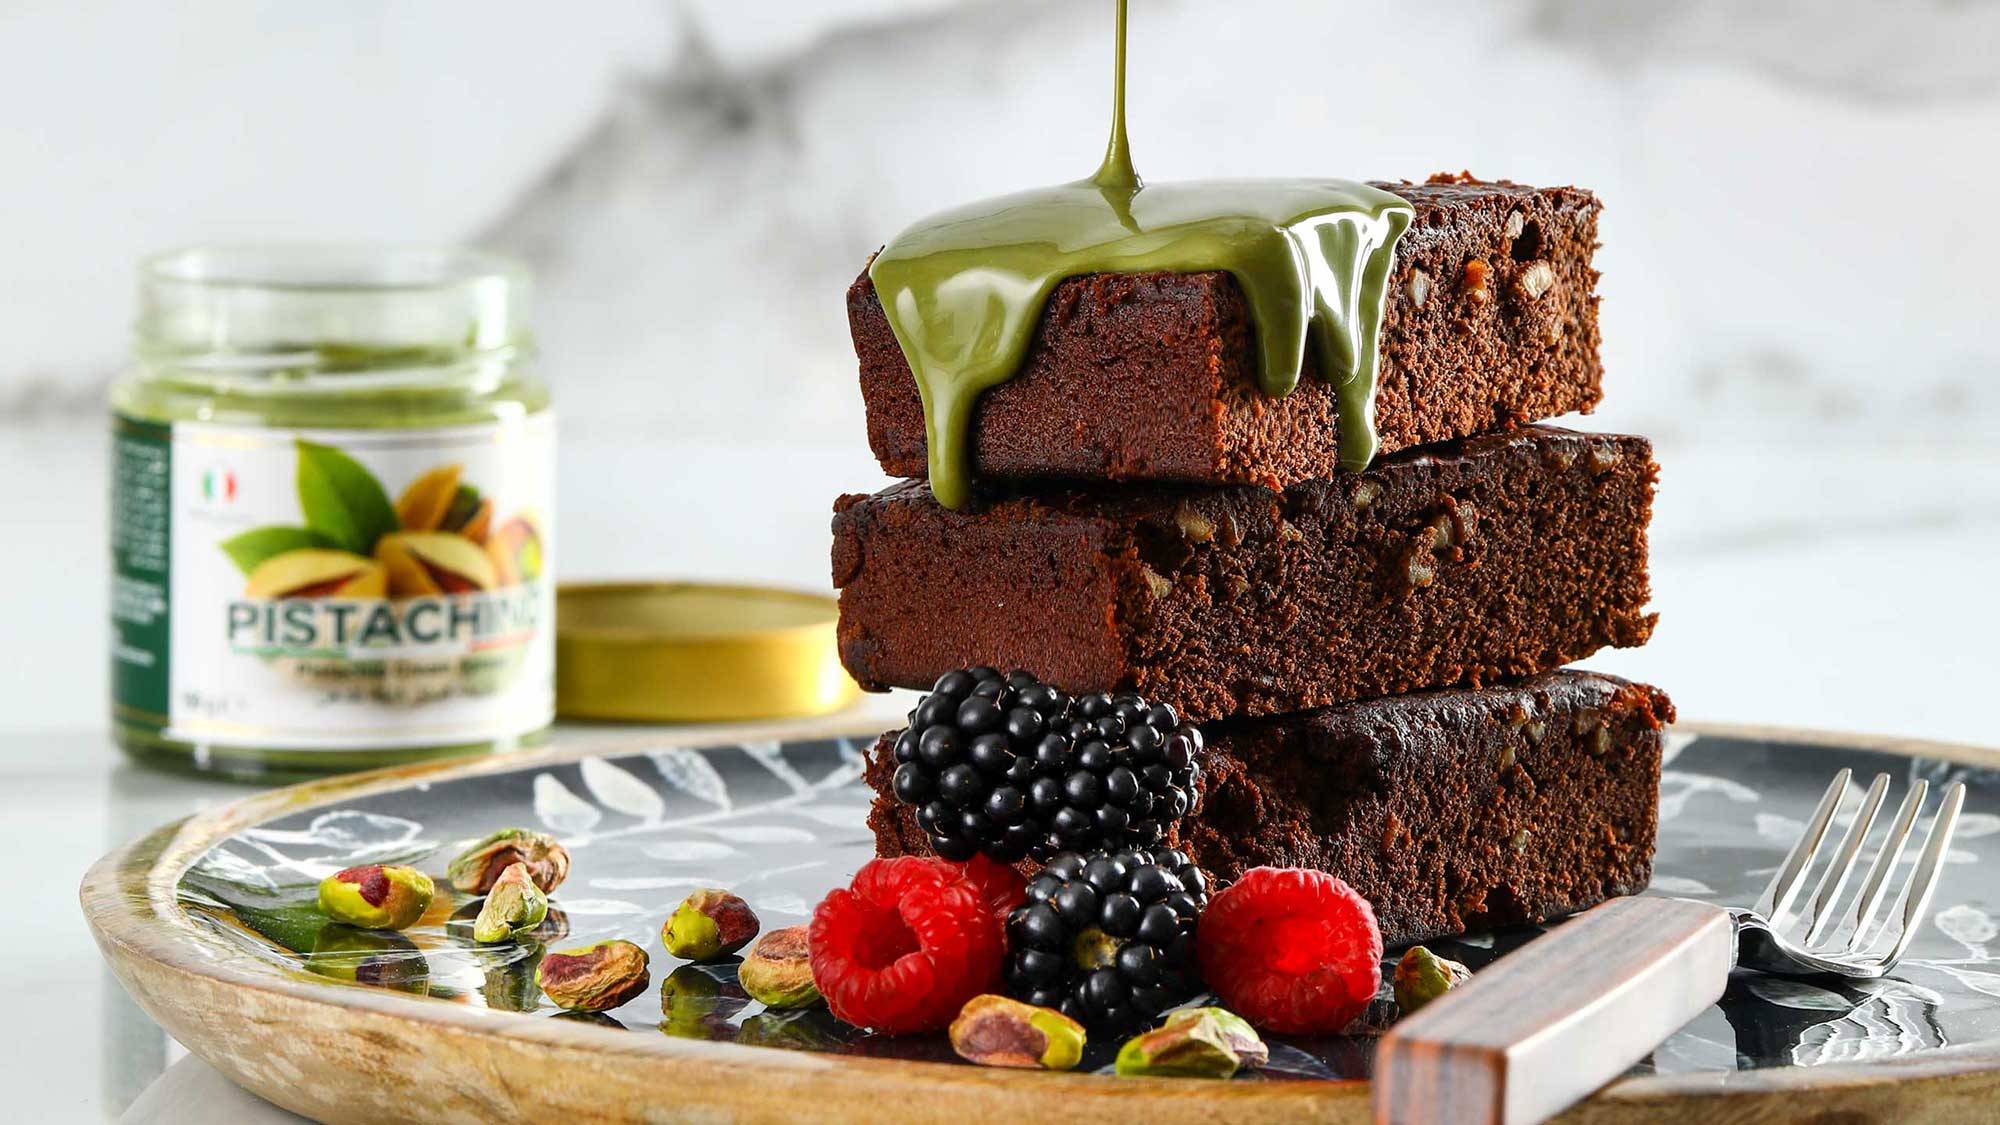 brownie-with-pistachio-spread-topping-home-page-image